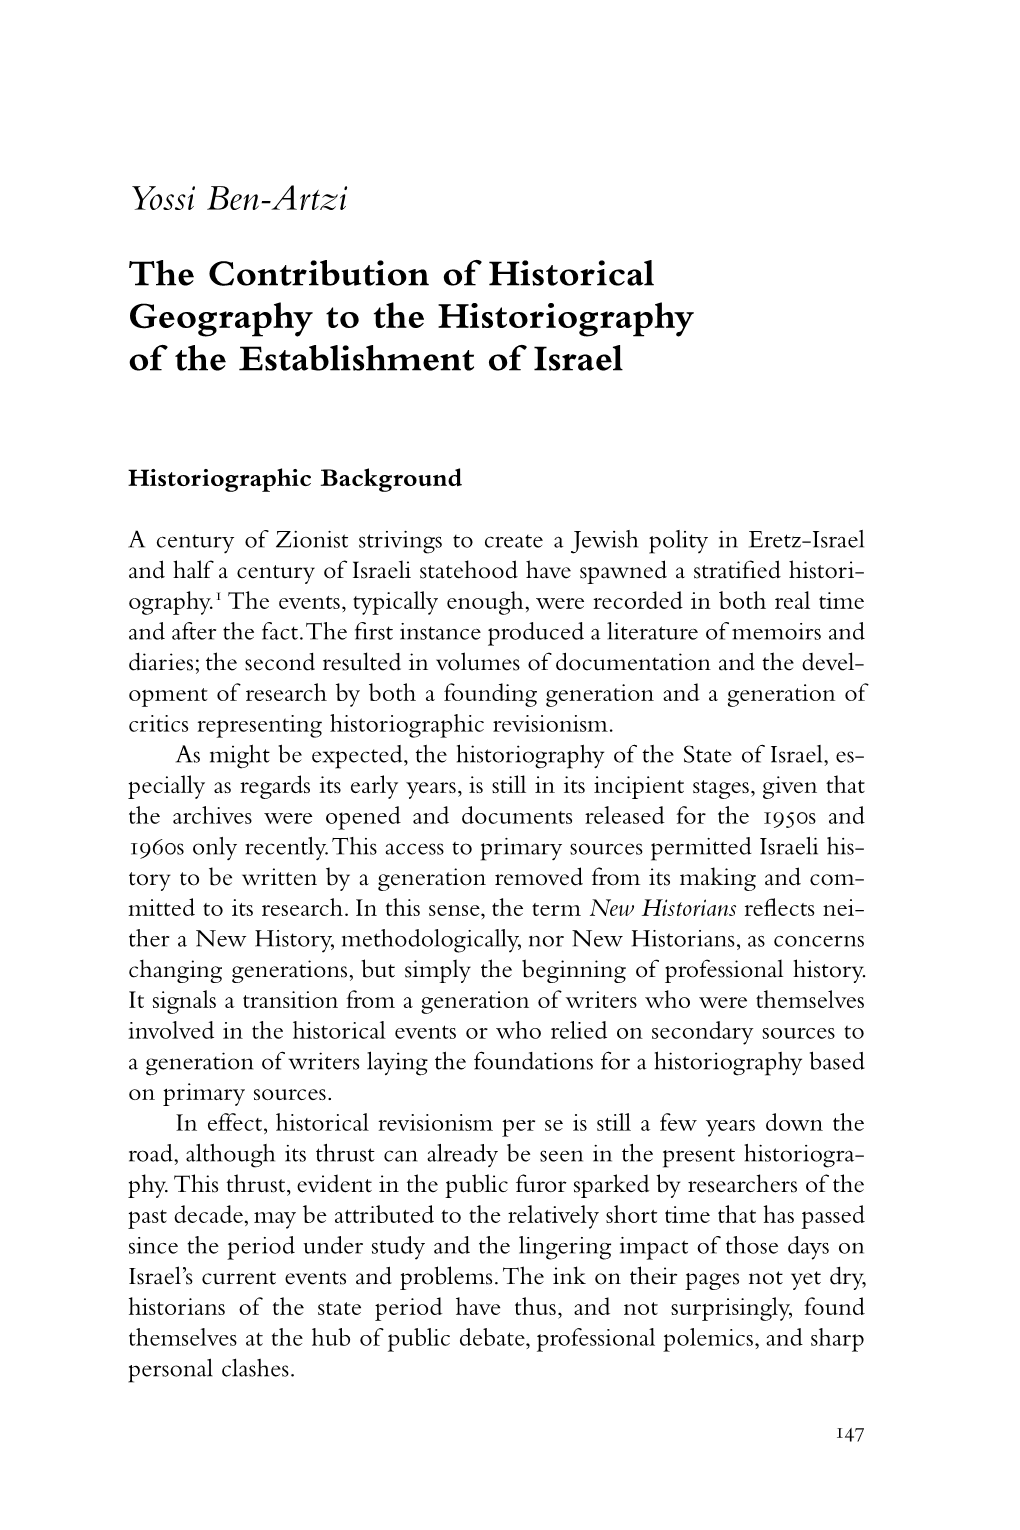 The Contribution of Historical Geography to the Historiography of the Establishment of Israel